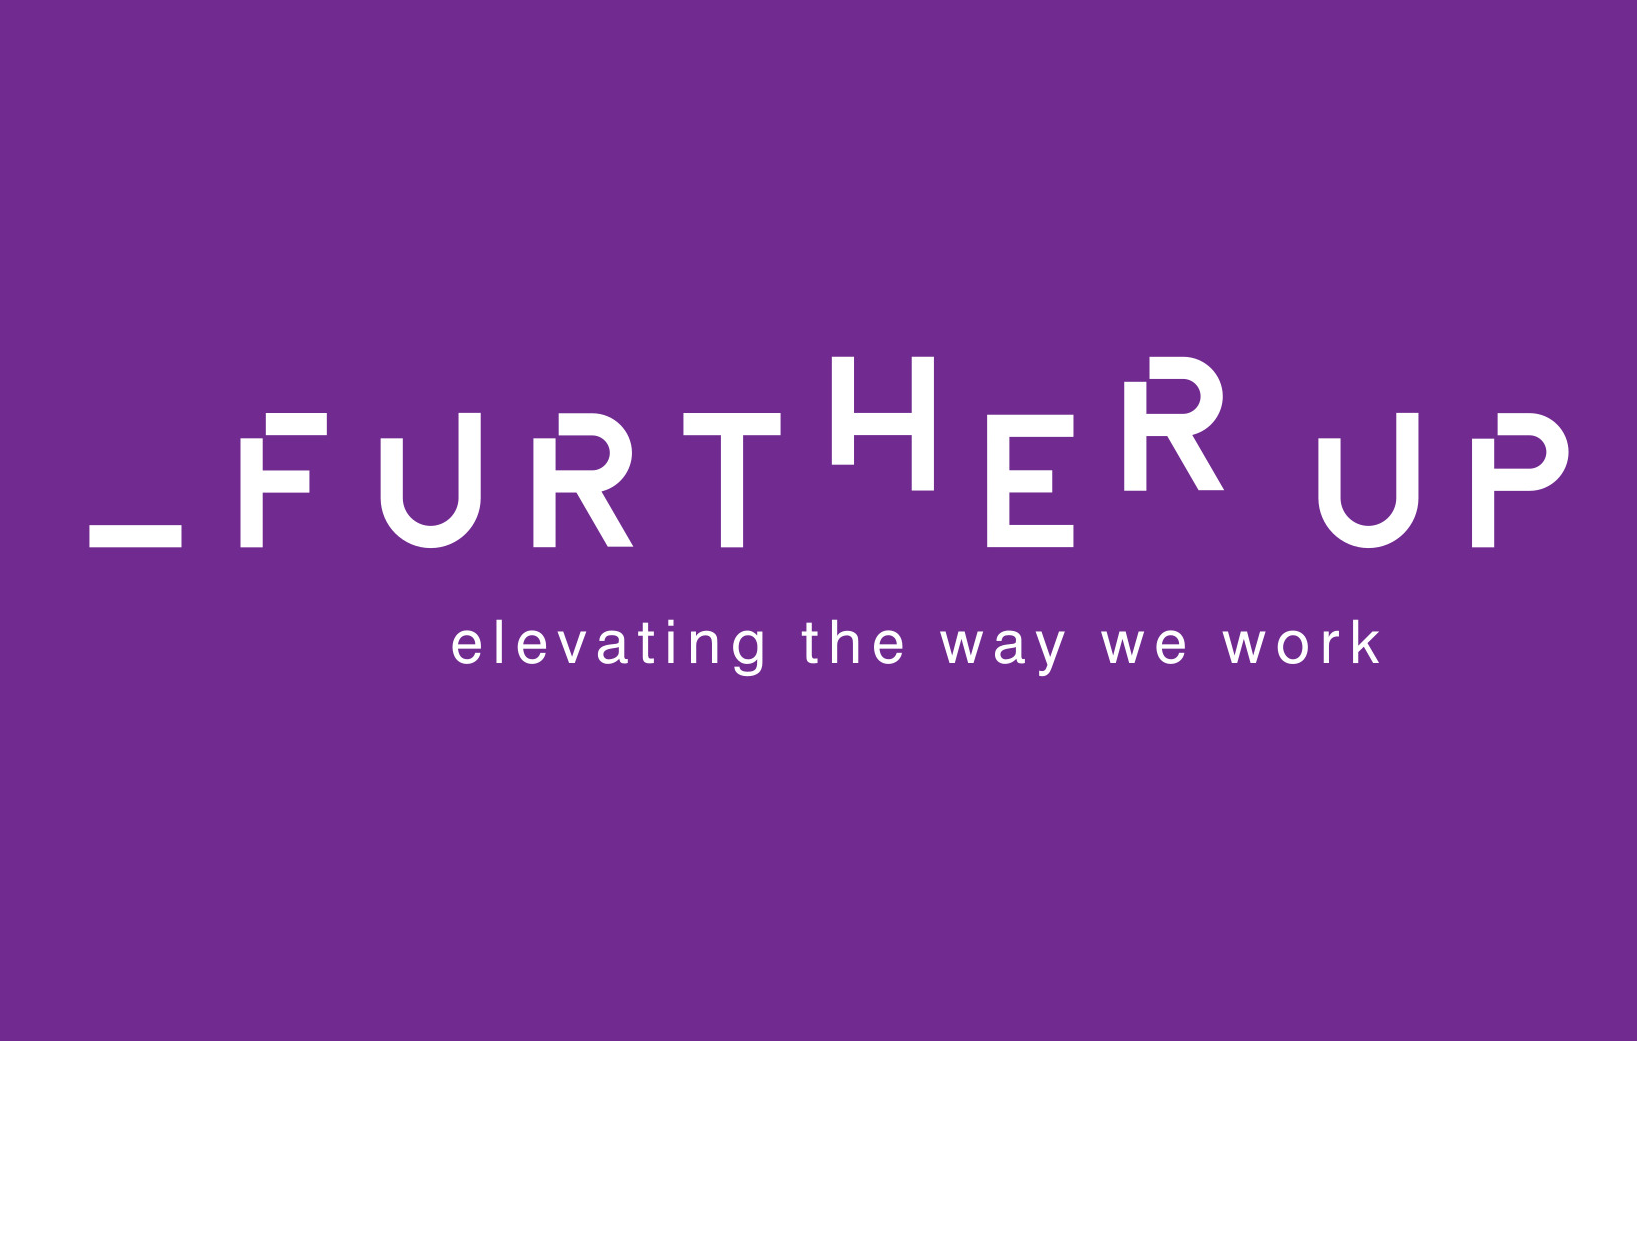 Further Up-HR